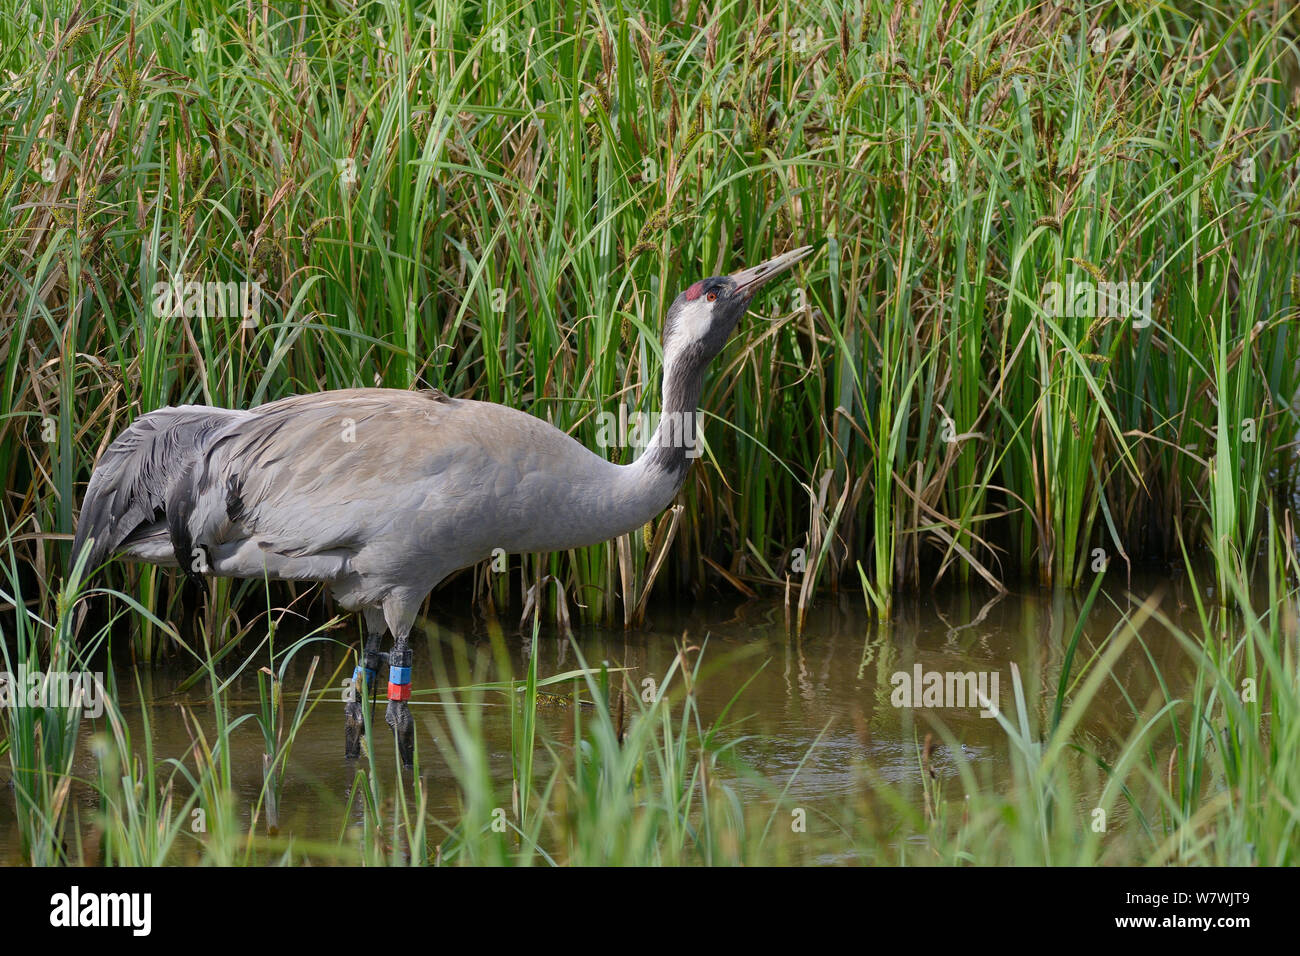 Common / Eurasian crane (Grus grus) &#39;Chris&#39; aged 4 years,released by the Great Crane Project, drinking in a marshland sedge pool close to her nest site, Slimbridge, Gloucestershire, UK, May 2014. Stock Photo